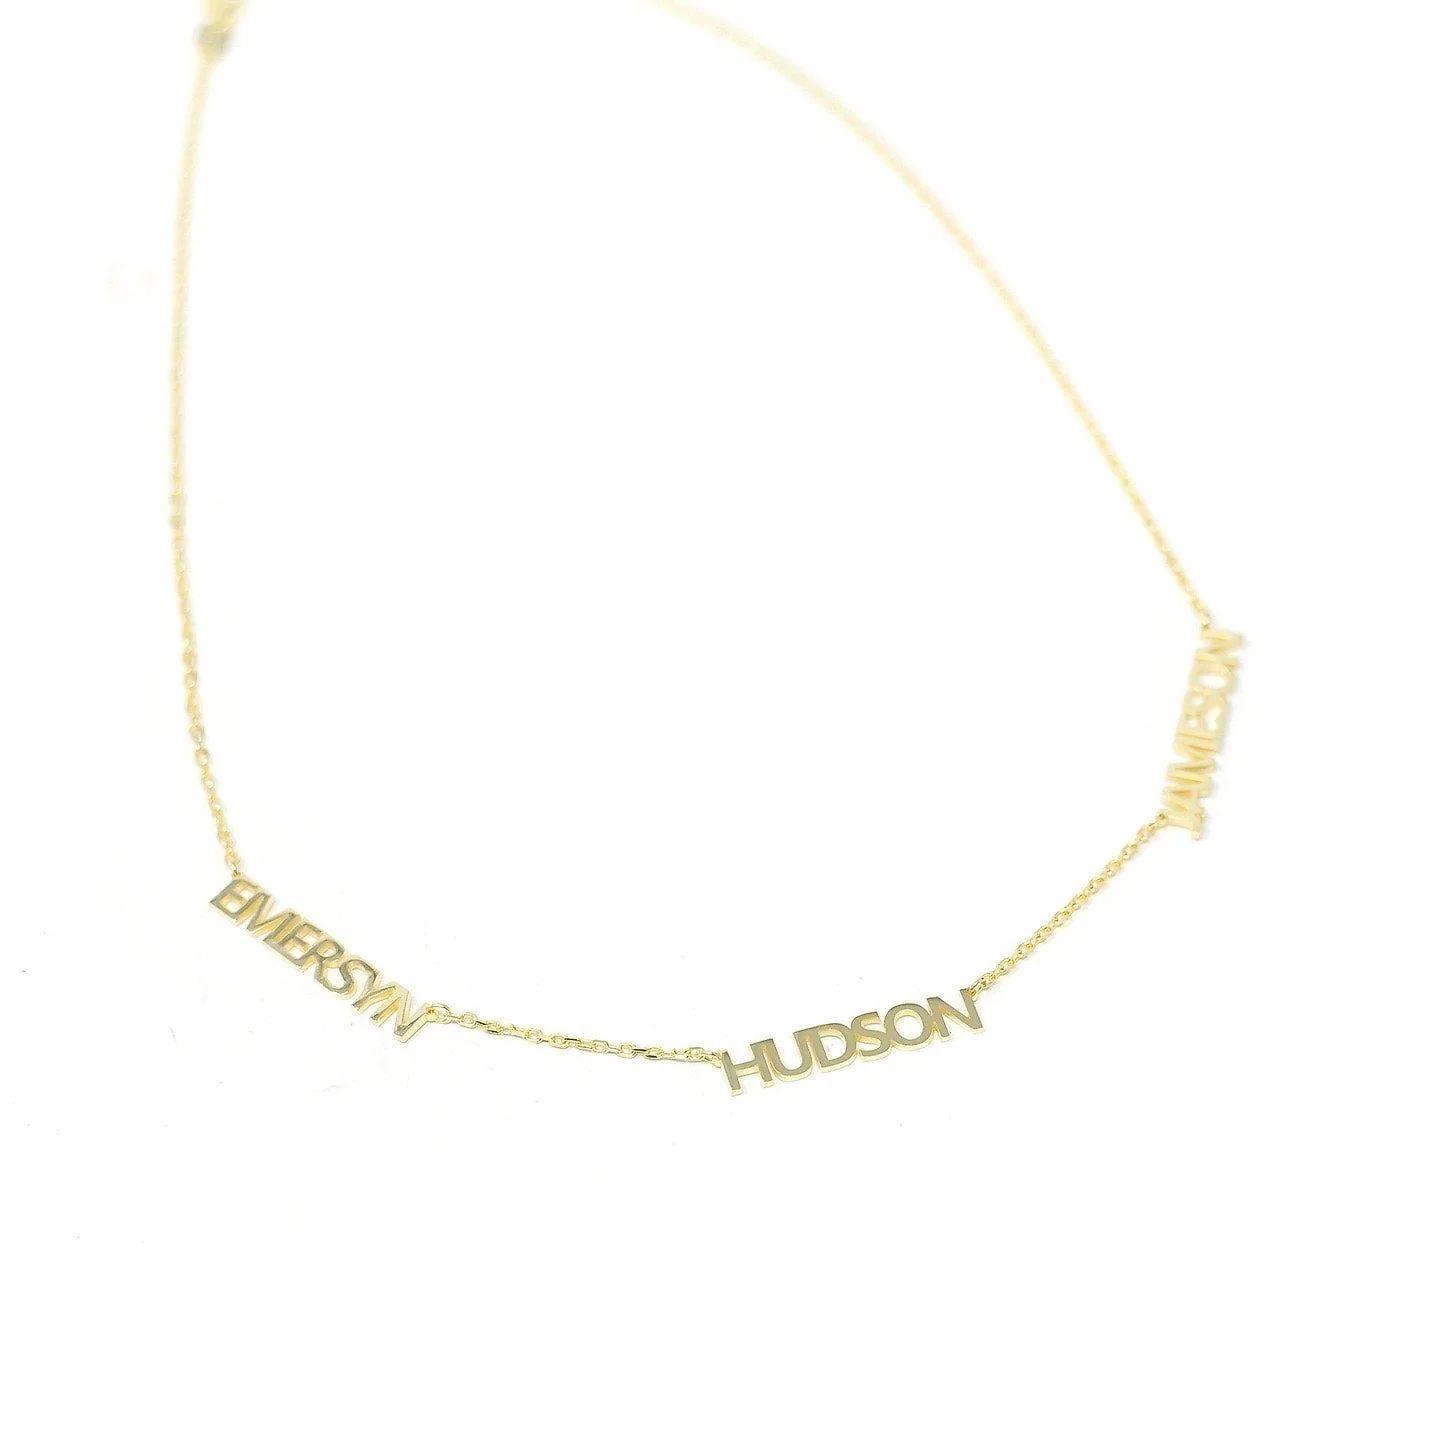 Custom Name or Mantra Necklace | The Sis Kiss